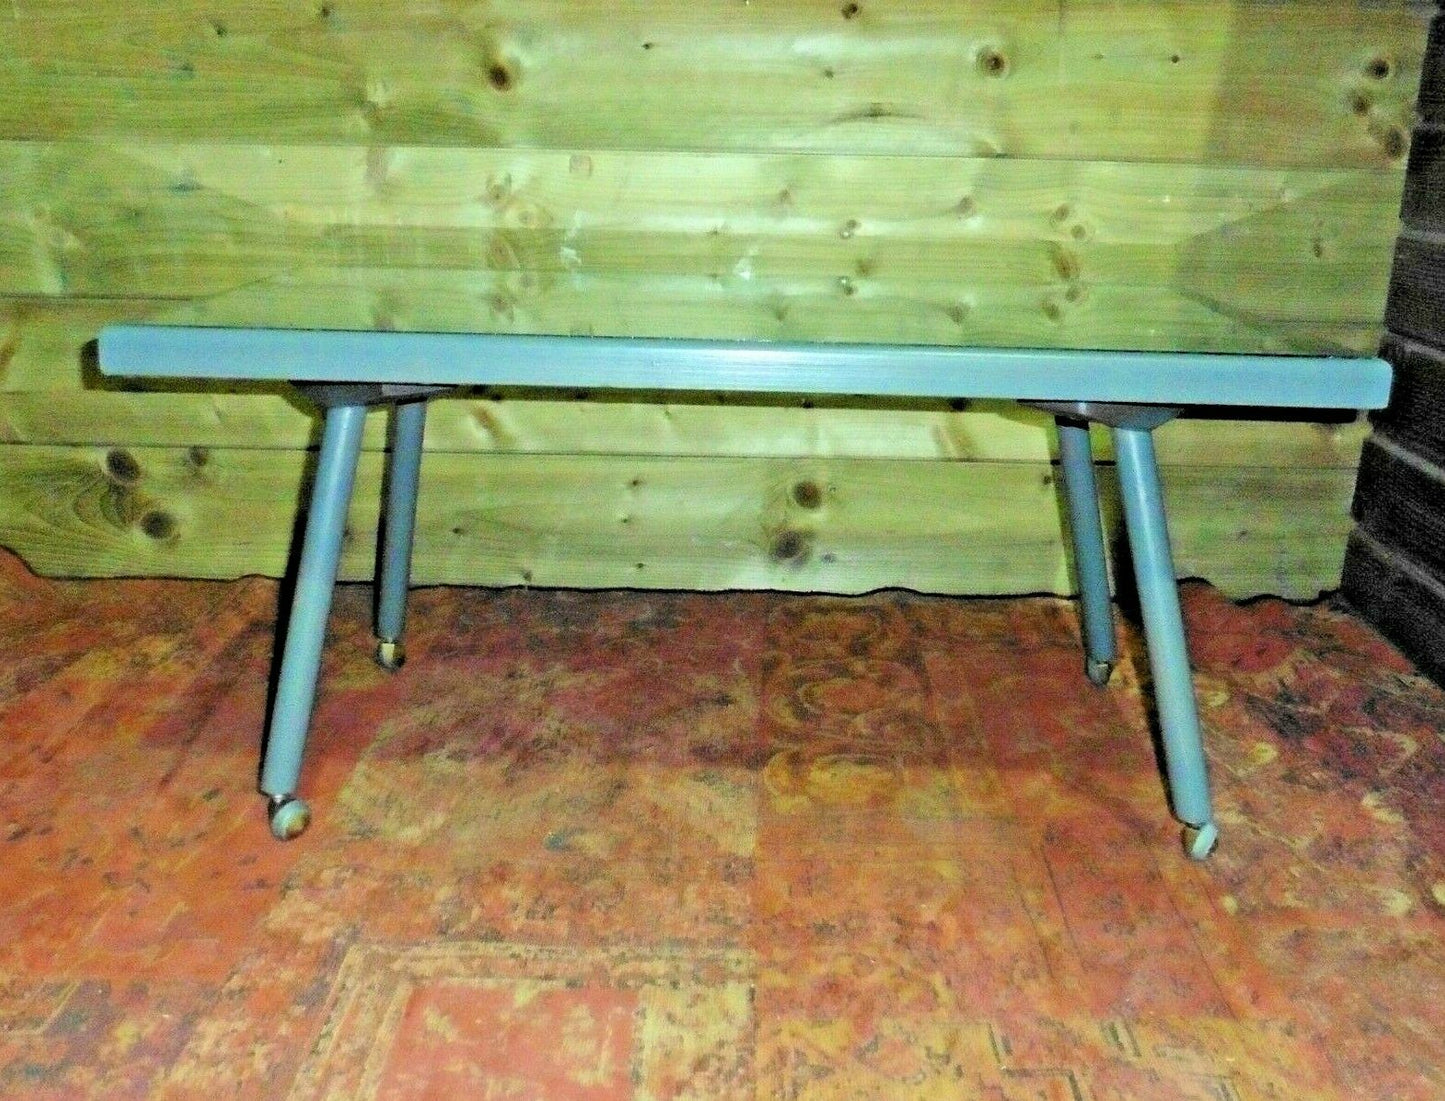 409.....Lovely Upcycled Retro Coffee Table / Mid Century Modern Coffee Table